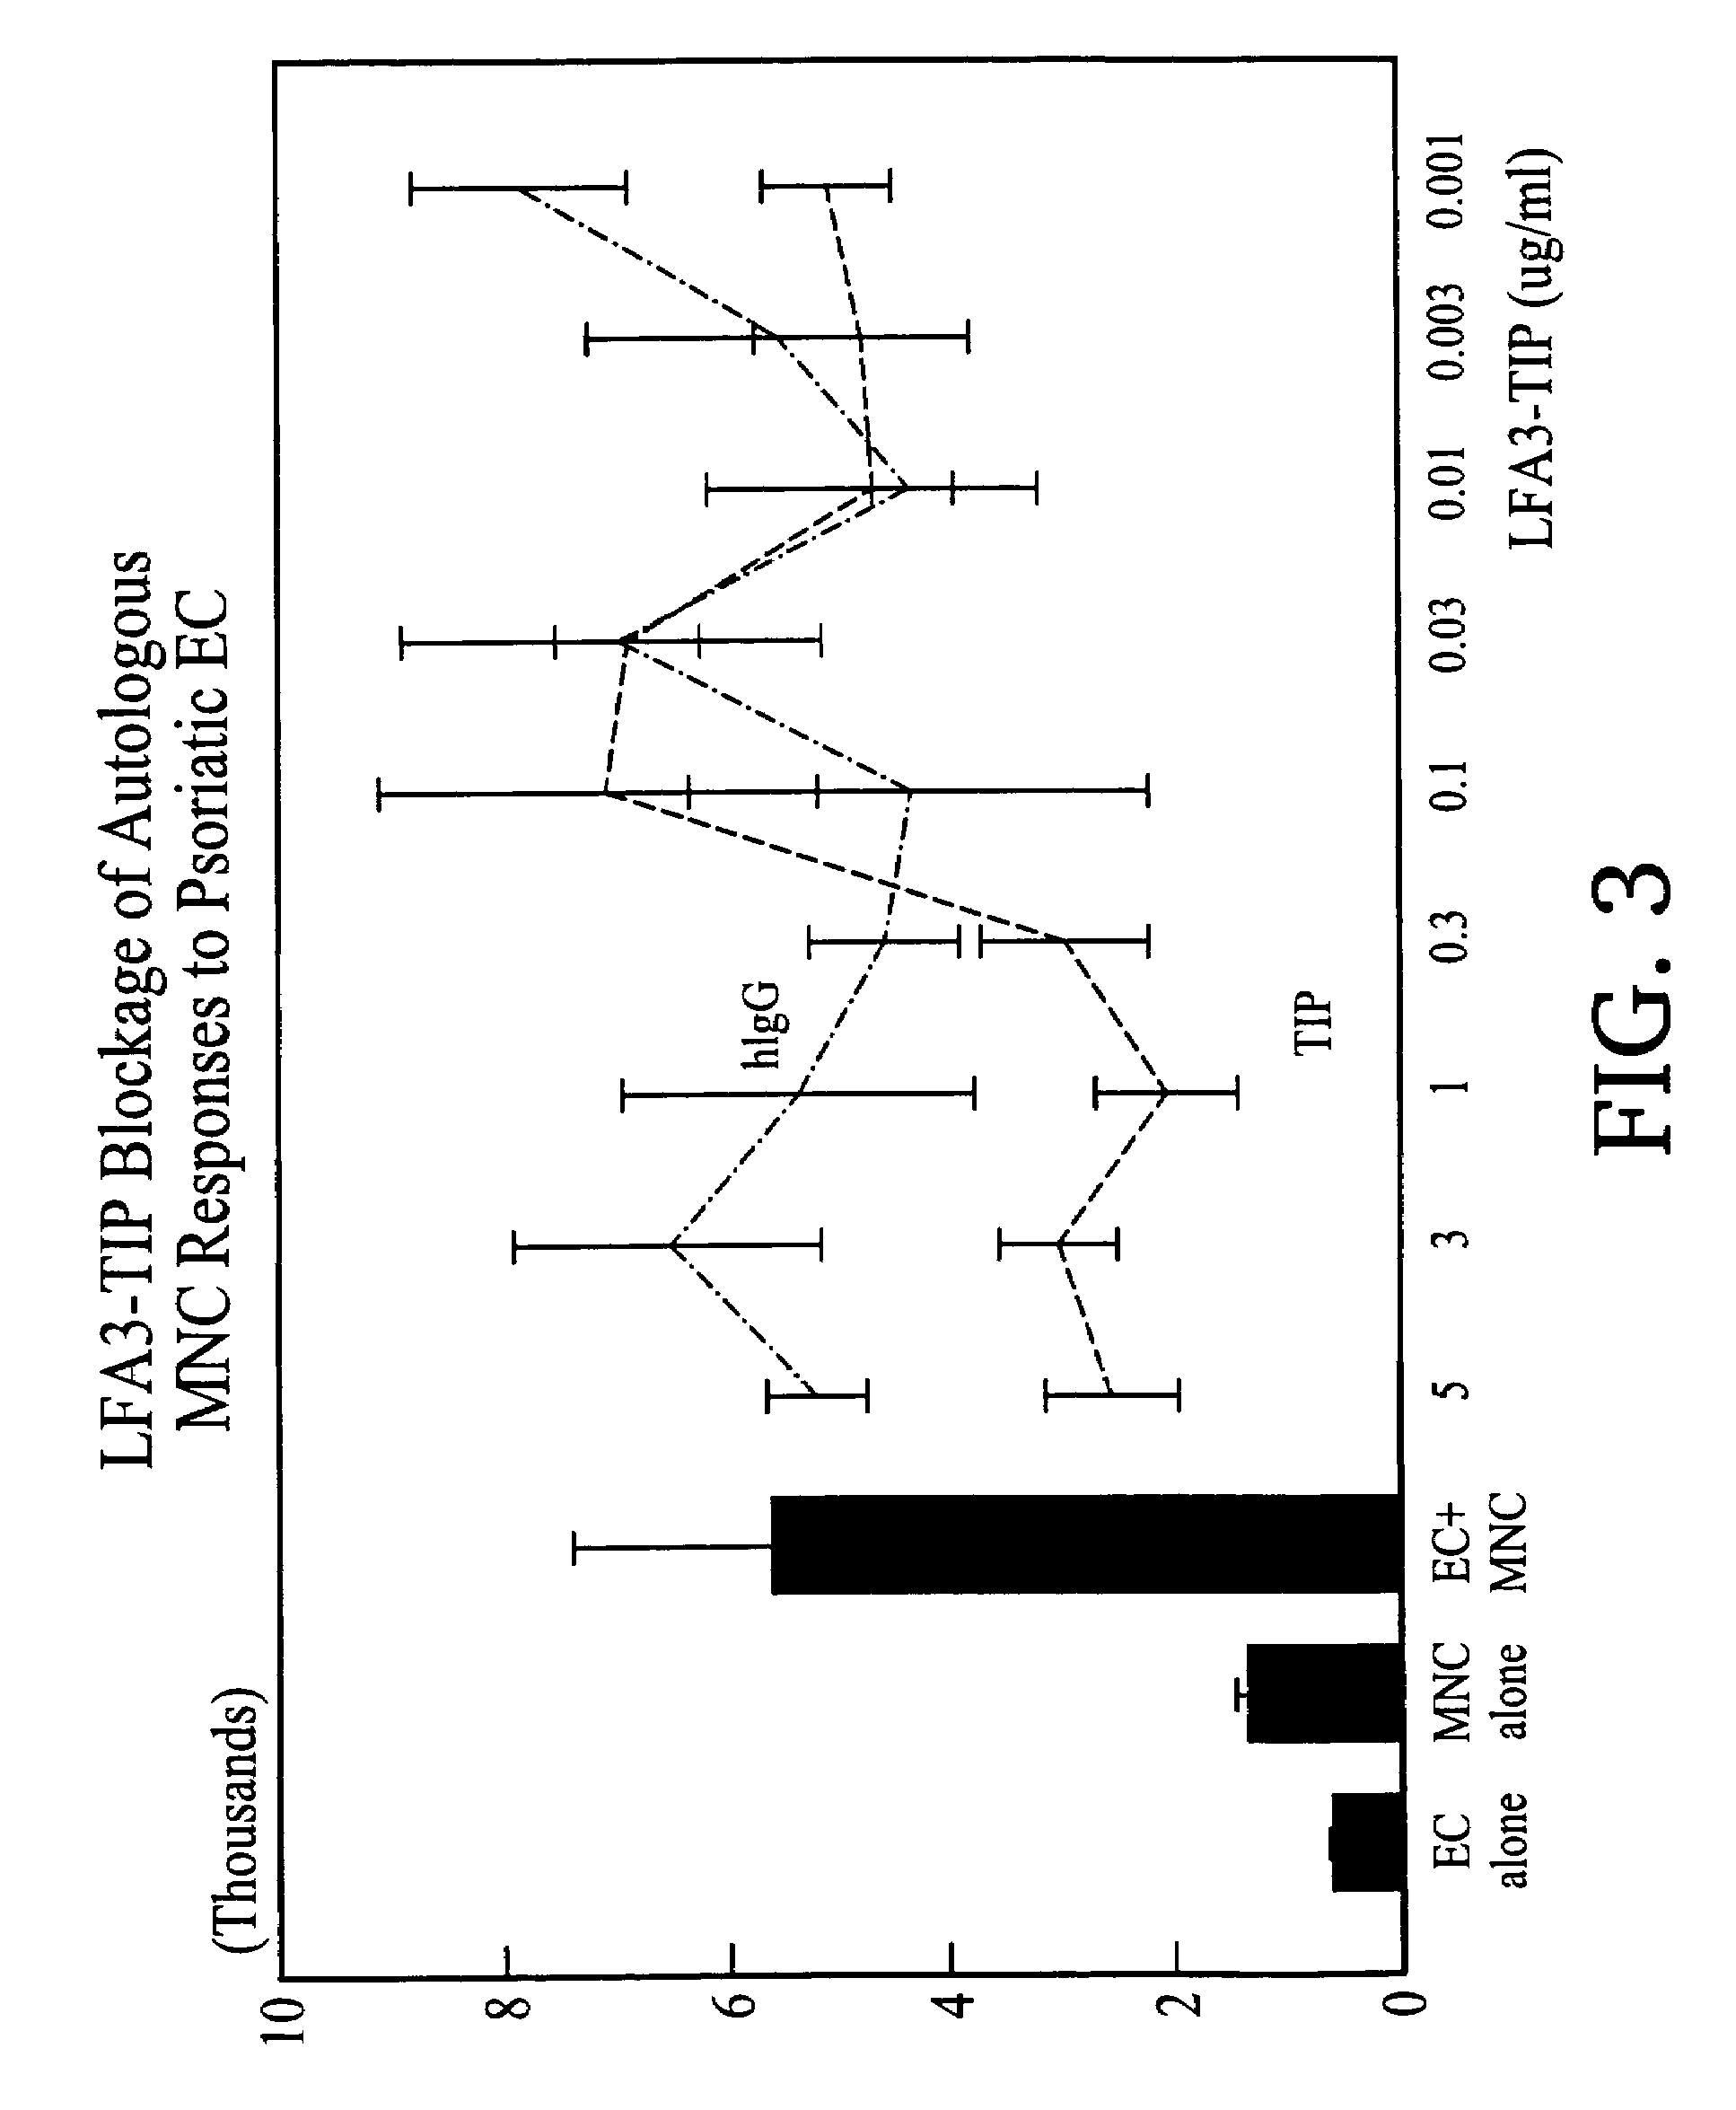 Methods of treating skin conditions using inhibitors of the CD2/LFA-3 interaction